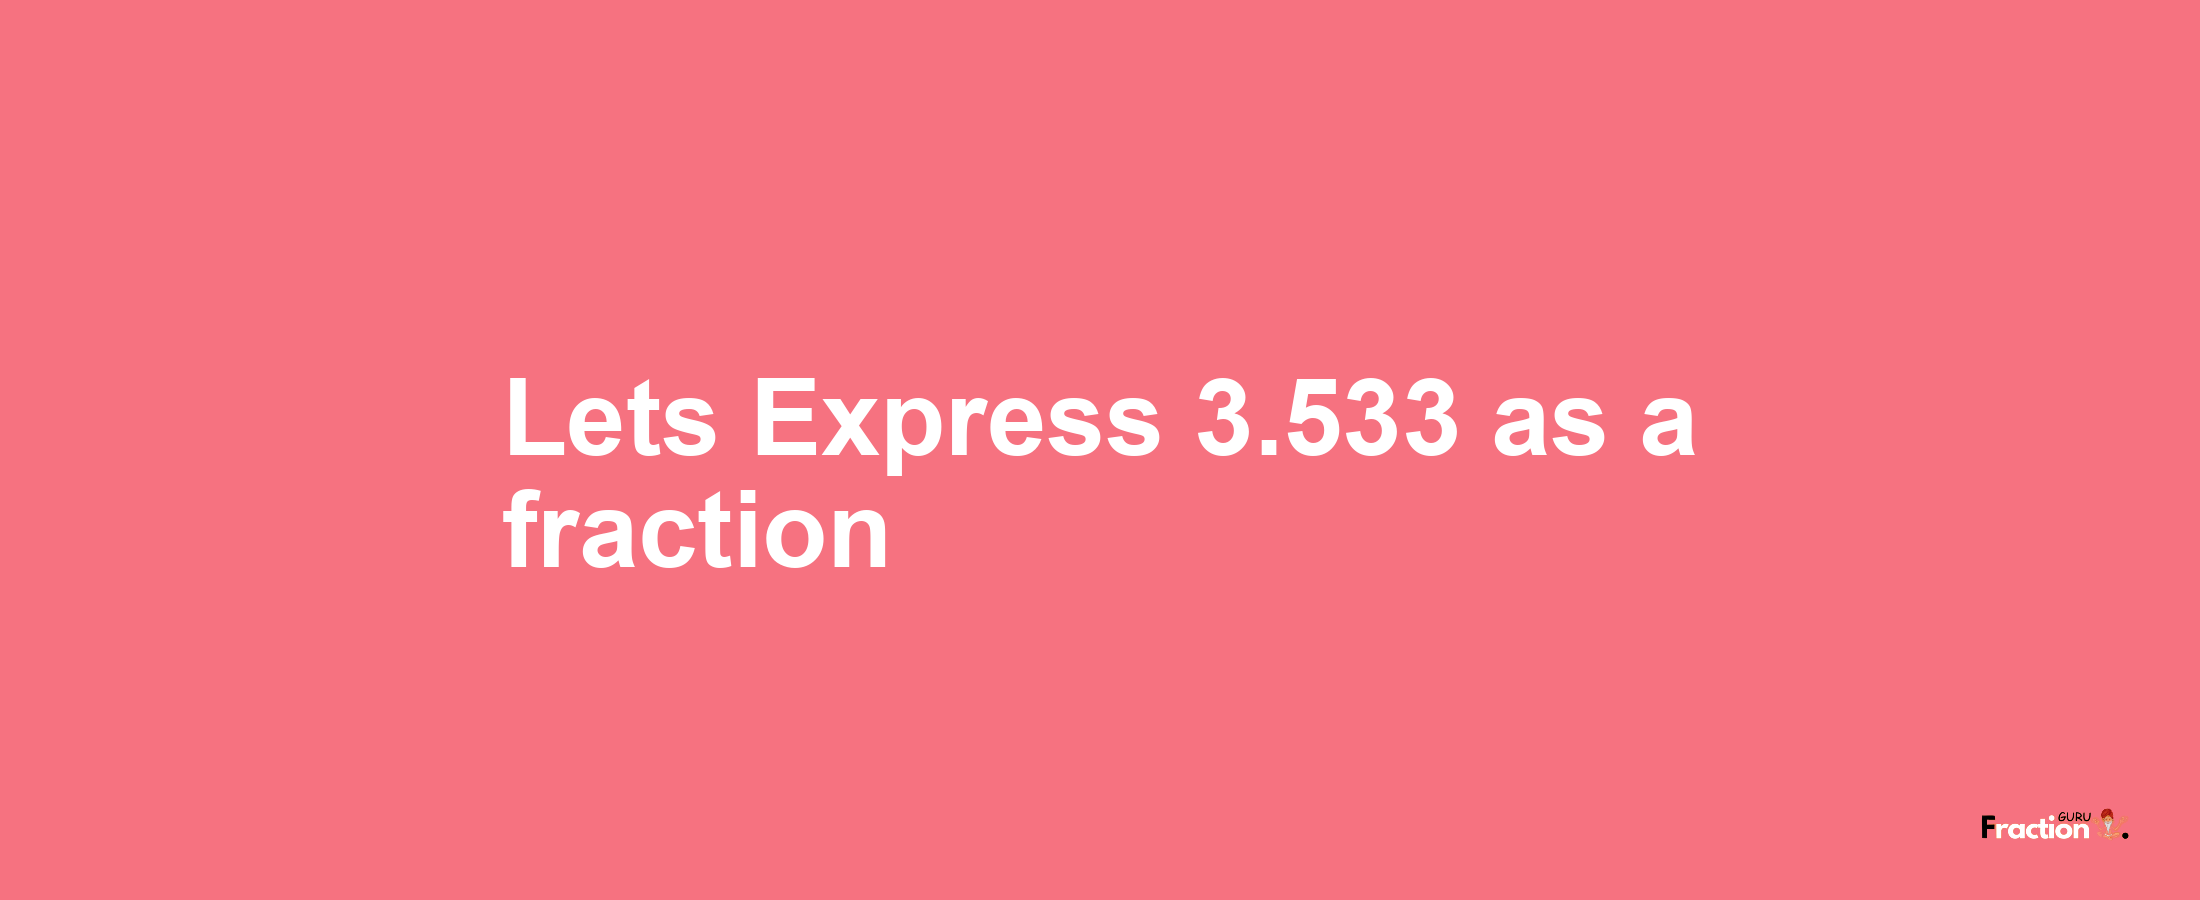 Lets Express 3.533 as afraction